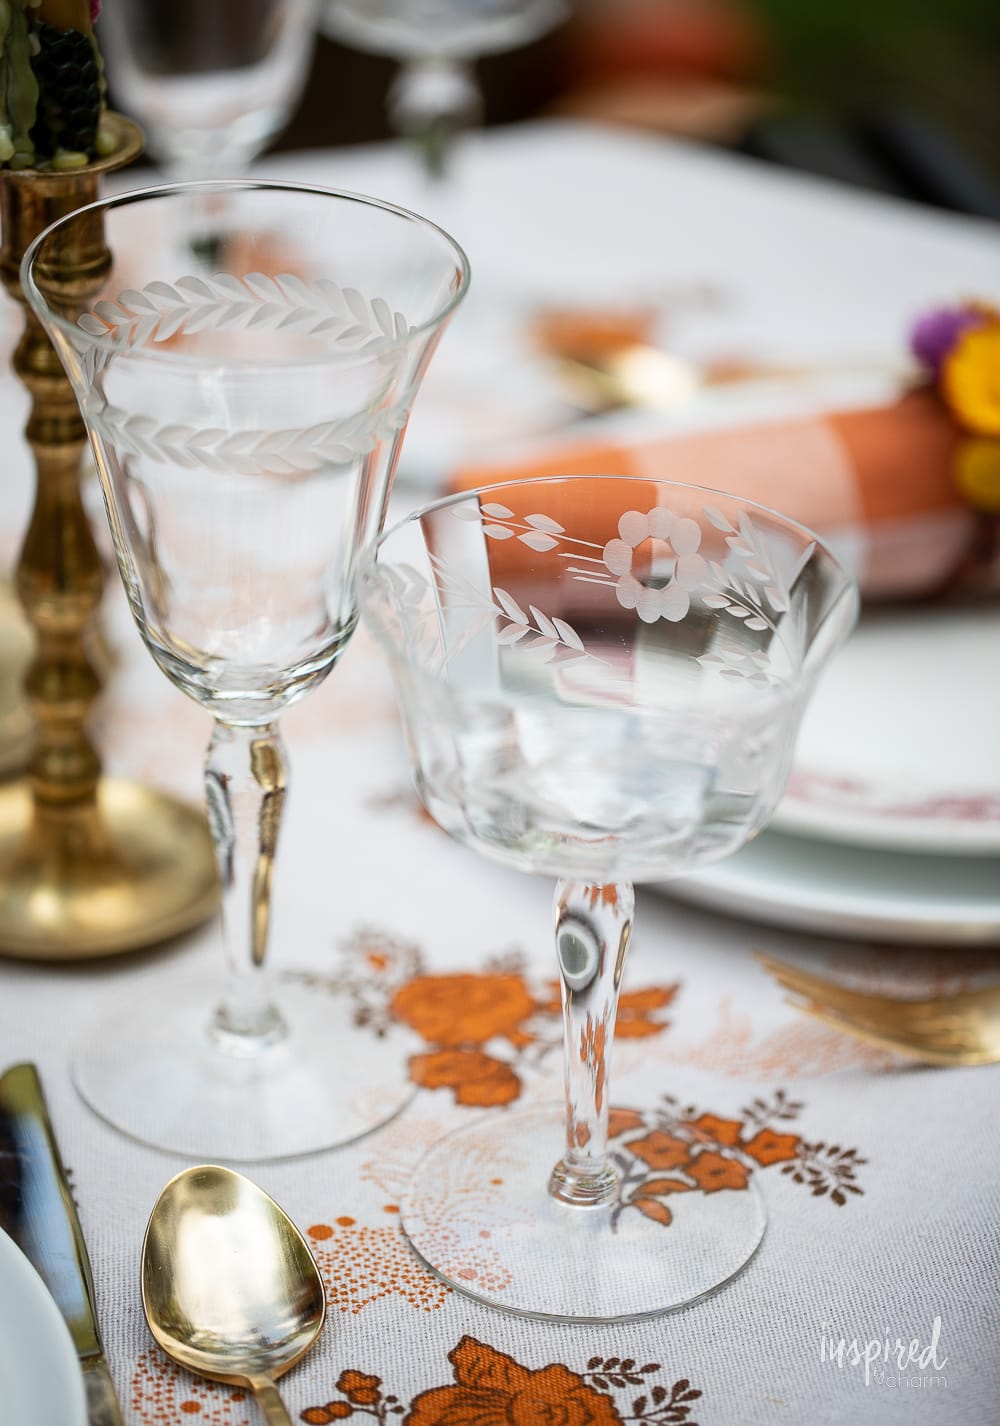 Vintage Glassware - Everything you NEED to Know!